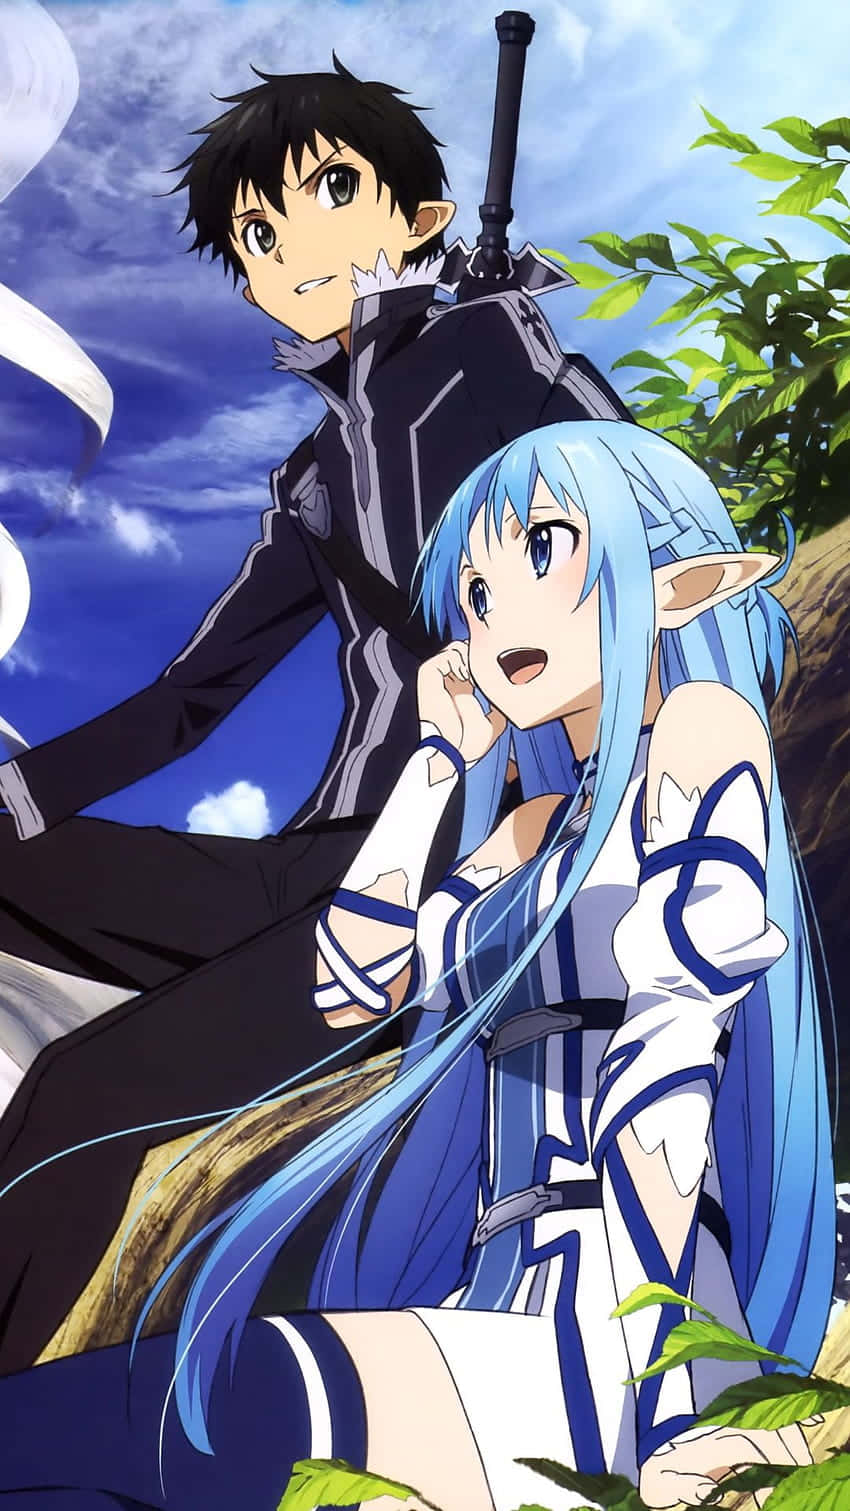 Discover the world of Sword Art Online with this empowering iPhone wallpaper! Wallpaper